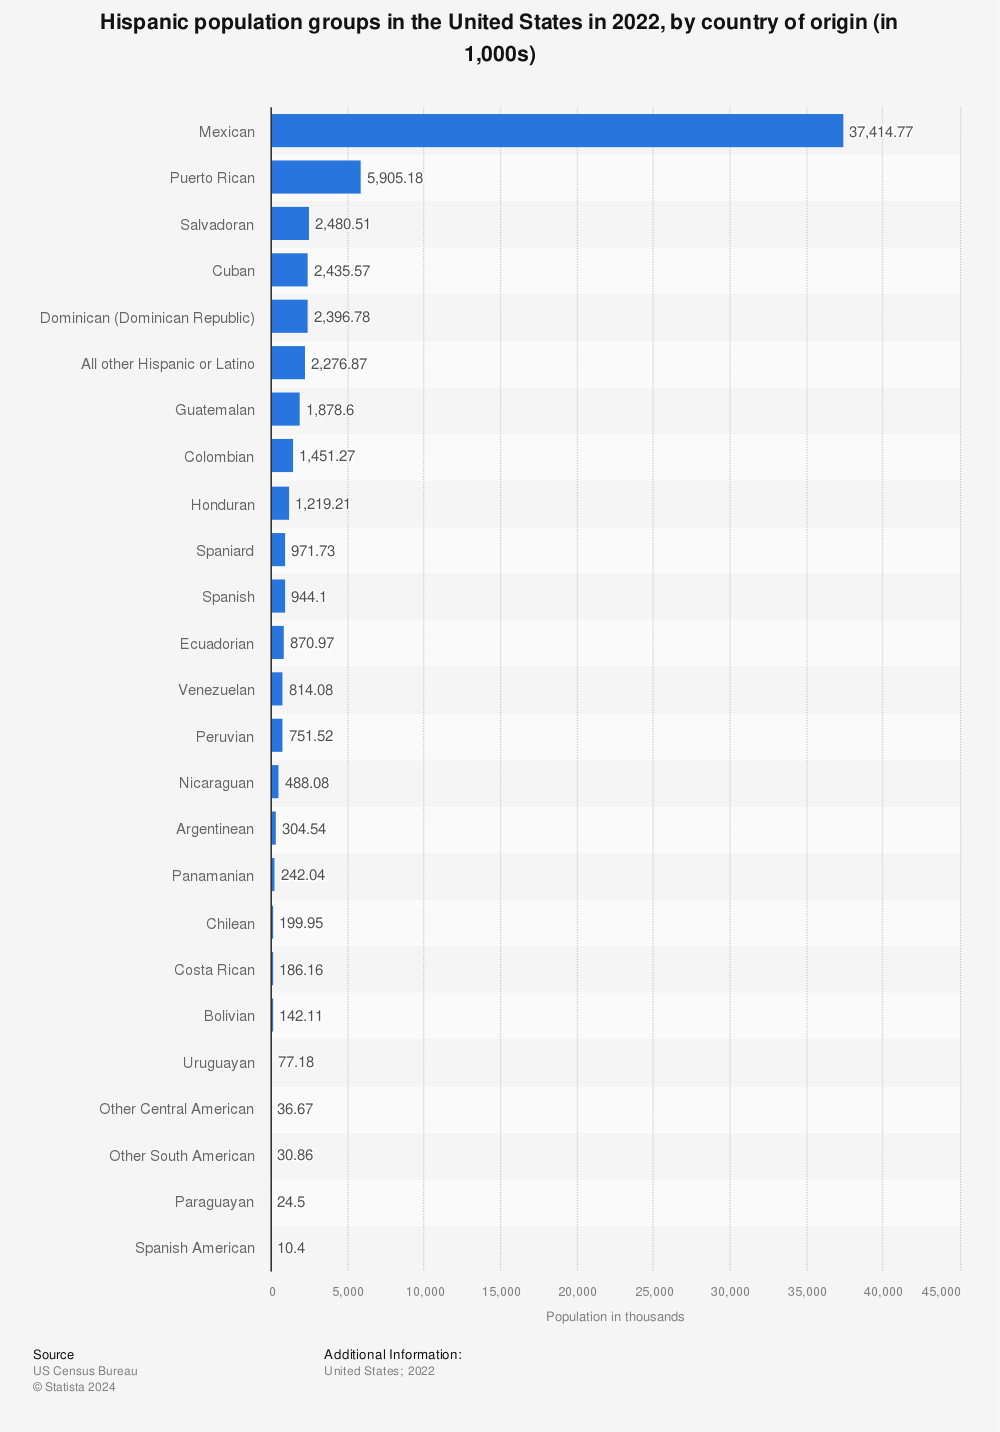 Statistic: Hispanic population groups in the United States, by country of origin 2019 (in 1,000s) | Statista